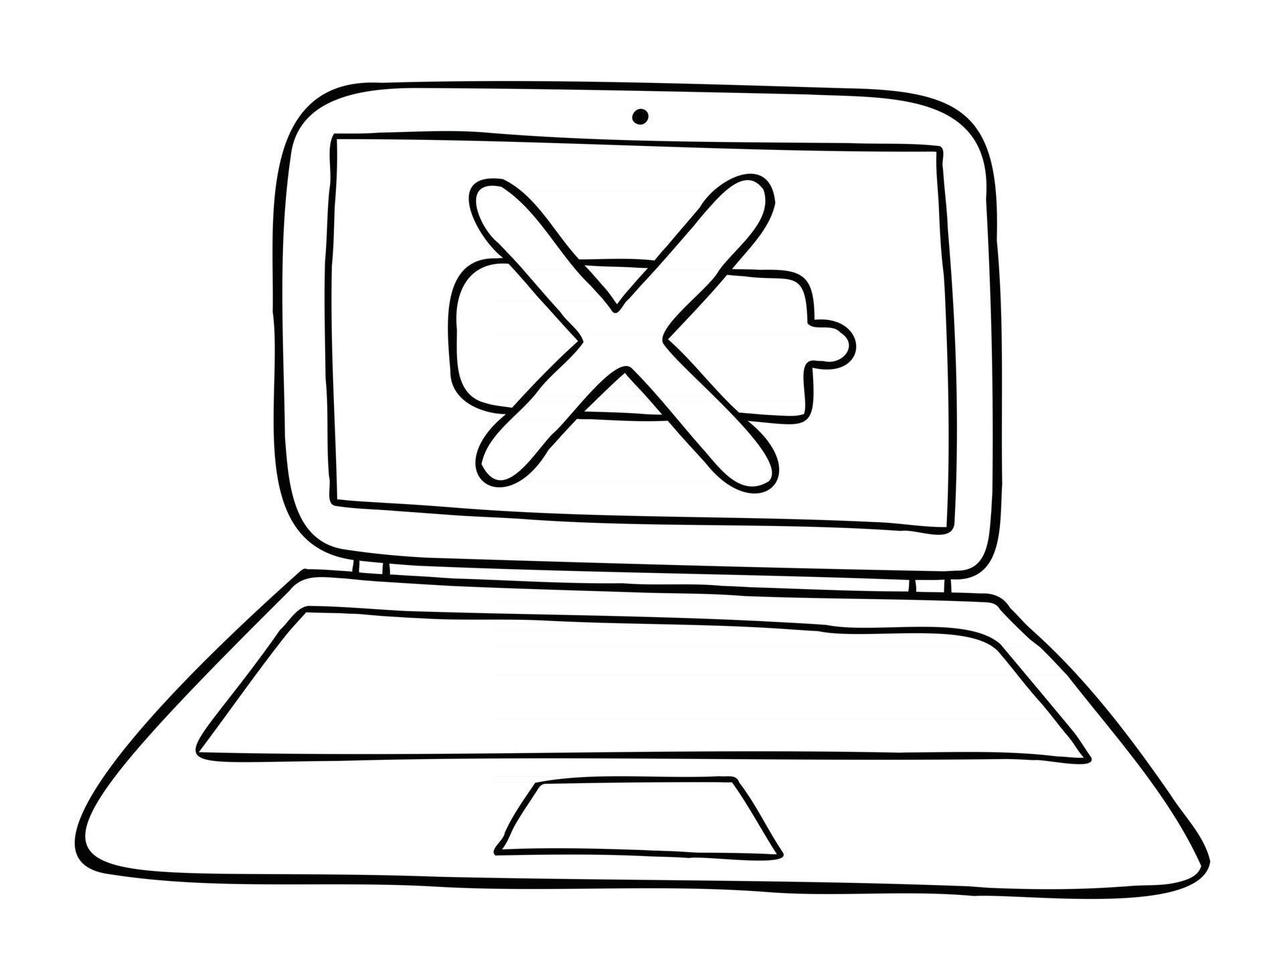 Cartoon Vector Illustration of Laptop Computer with Dead Battery